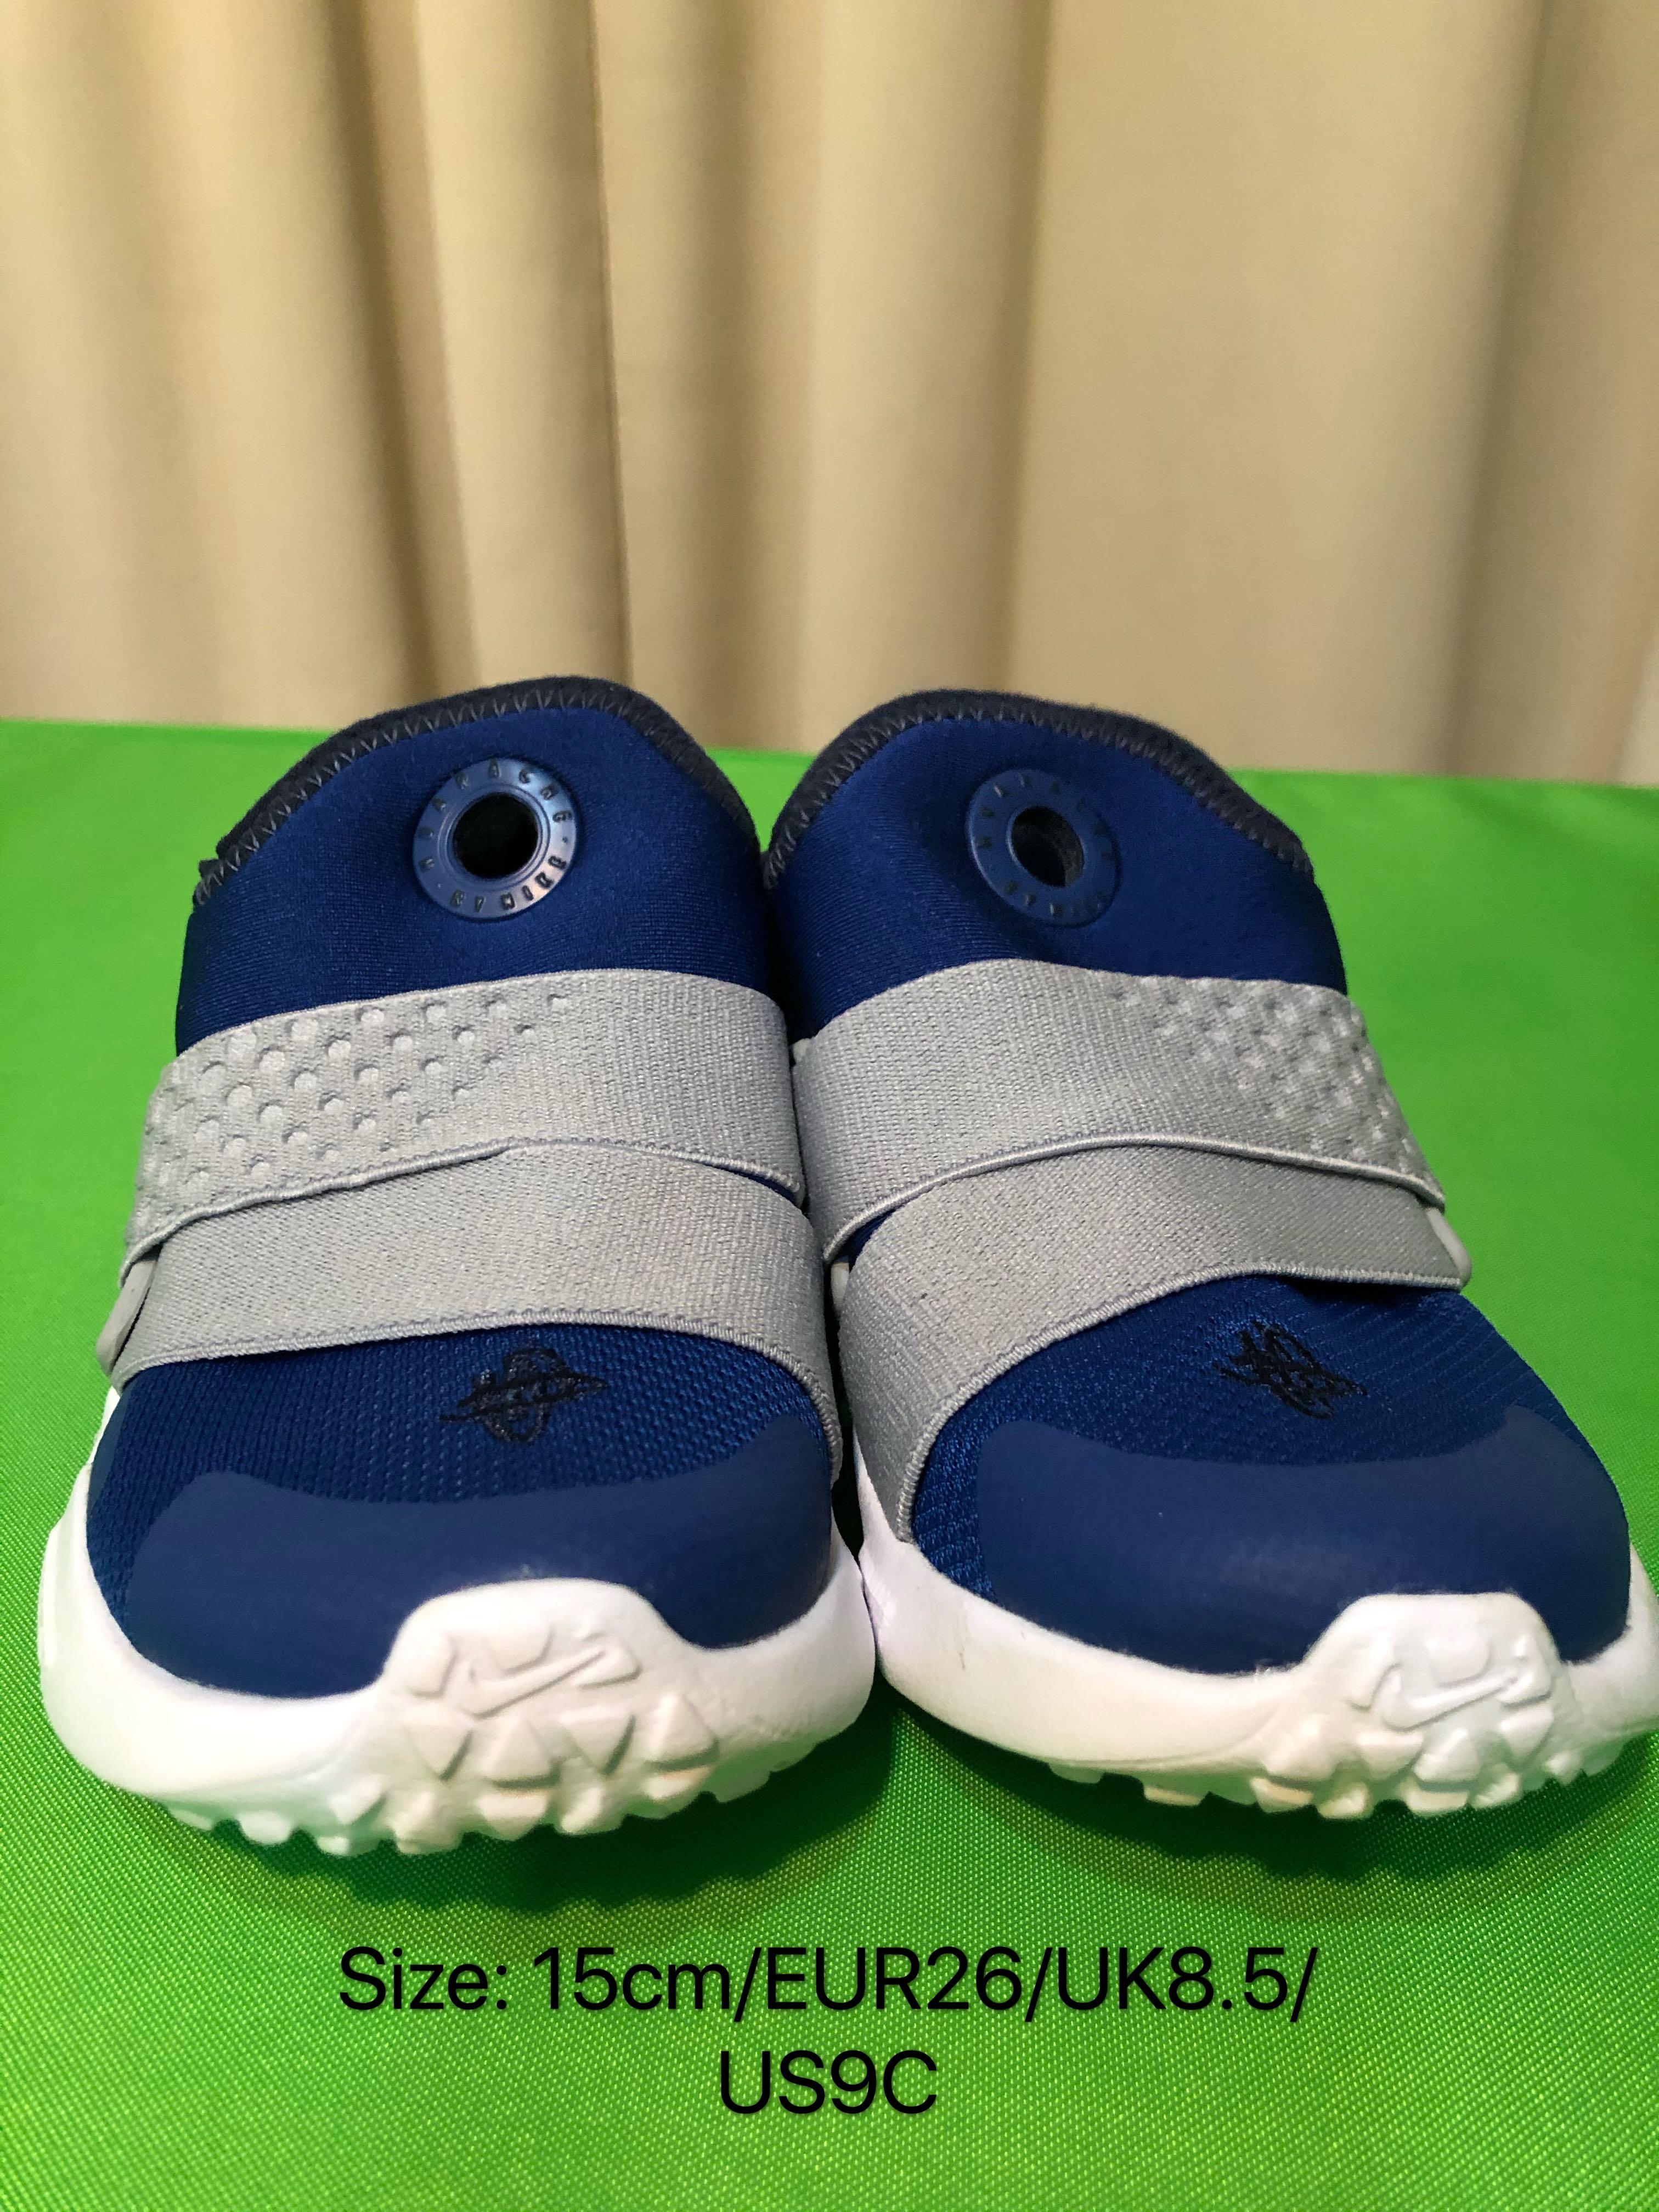 nike baby shoes size 5